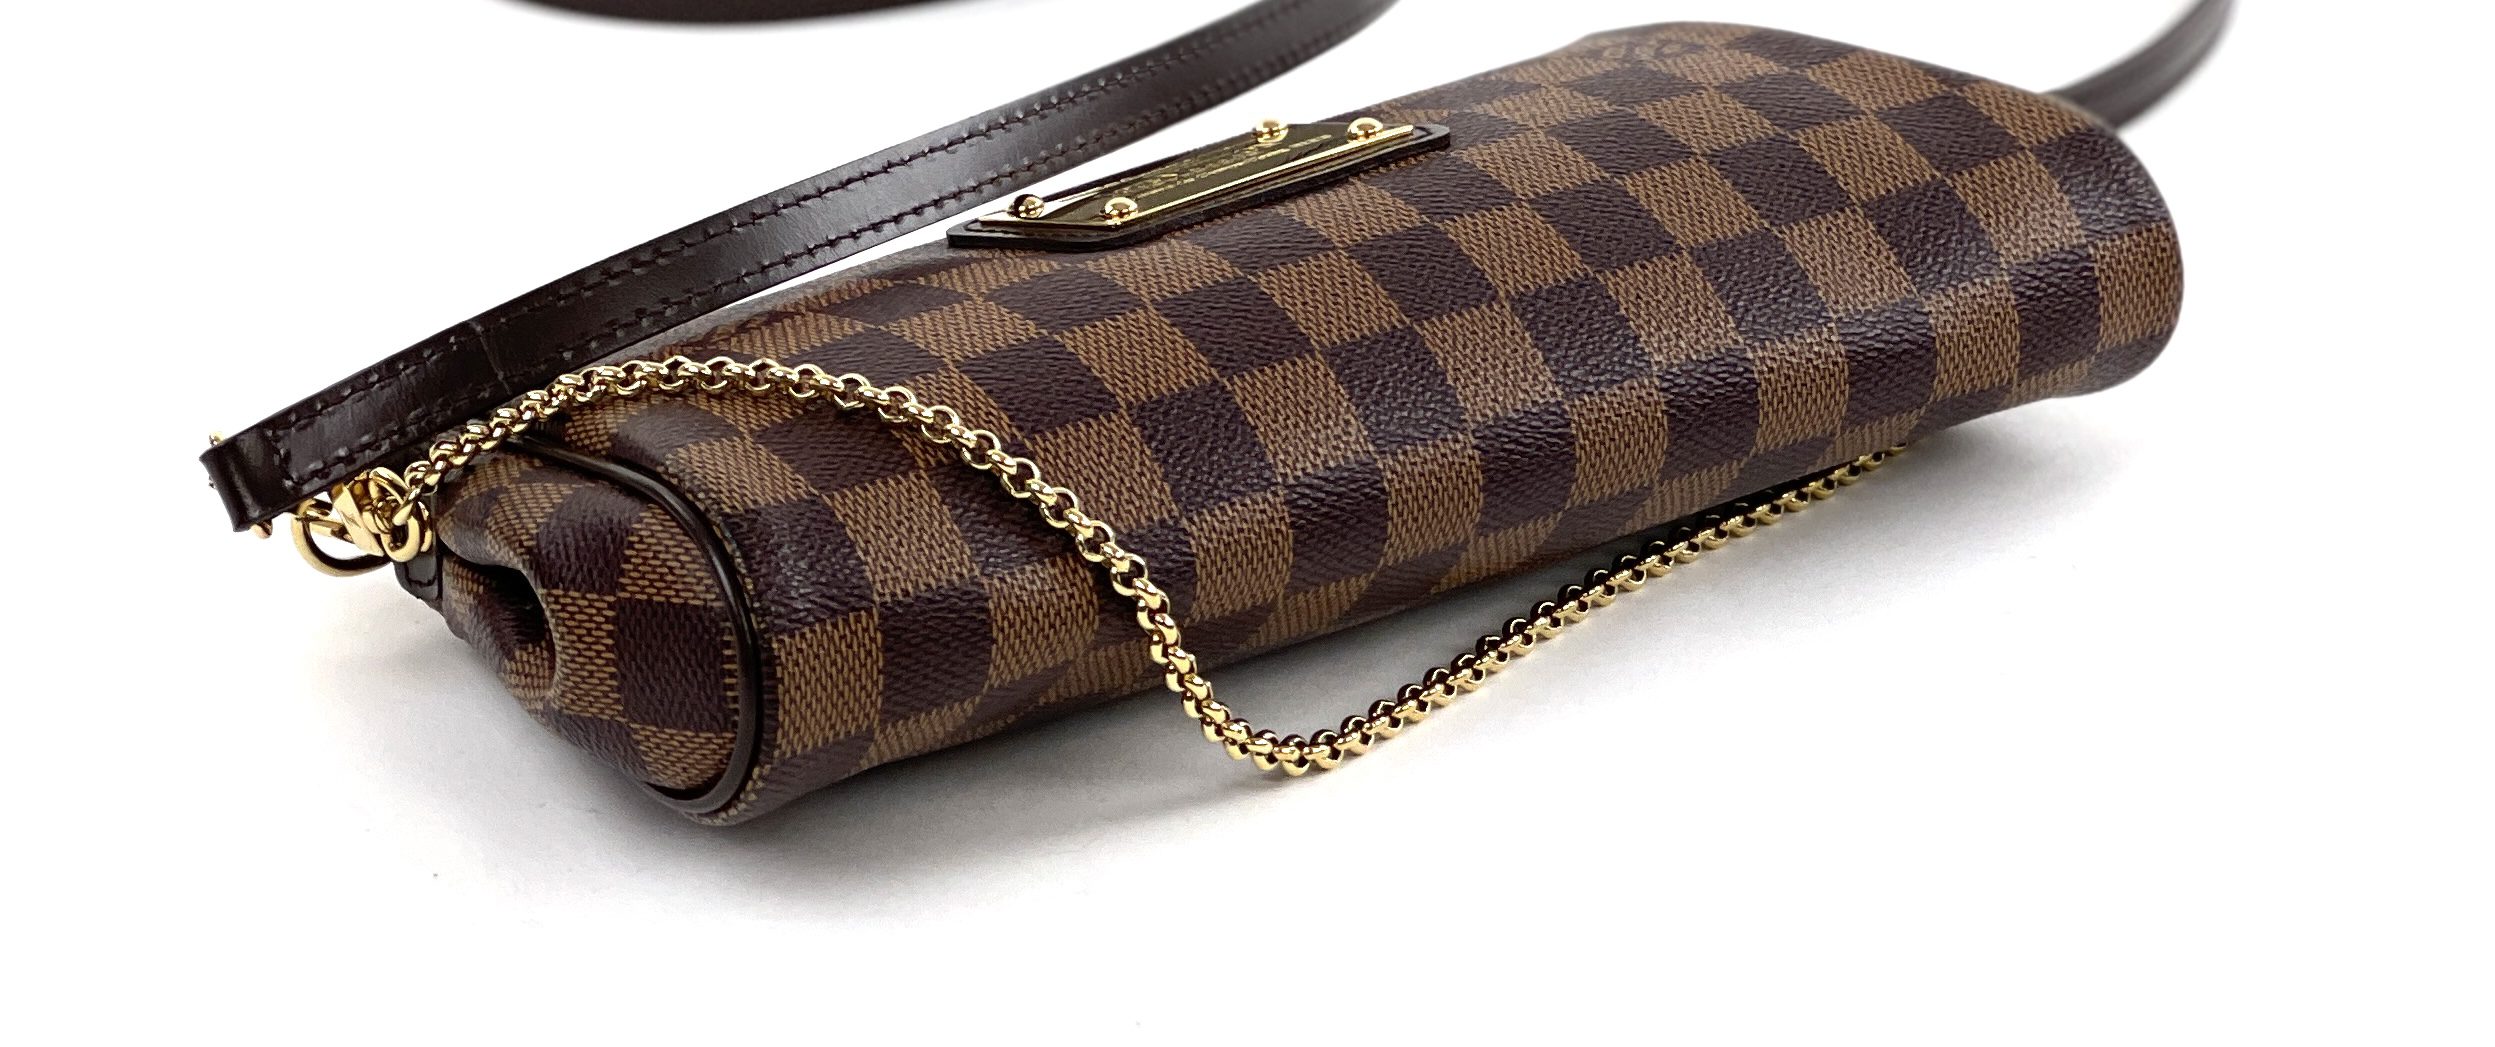 Louis Vuitton Eva Clutch in Damier Ebene Canvas❤, Gallery posted by Lexie